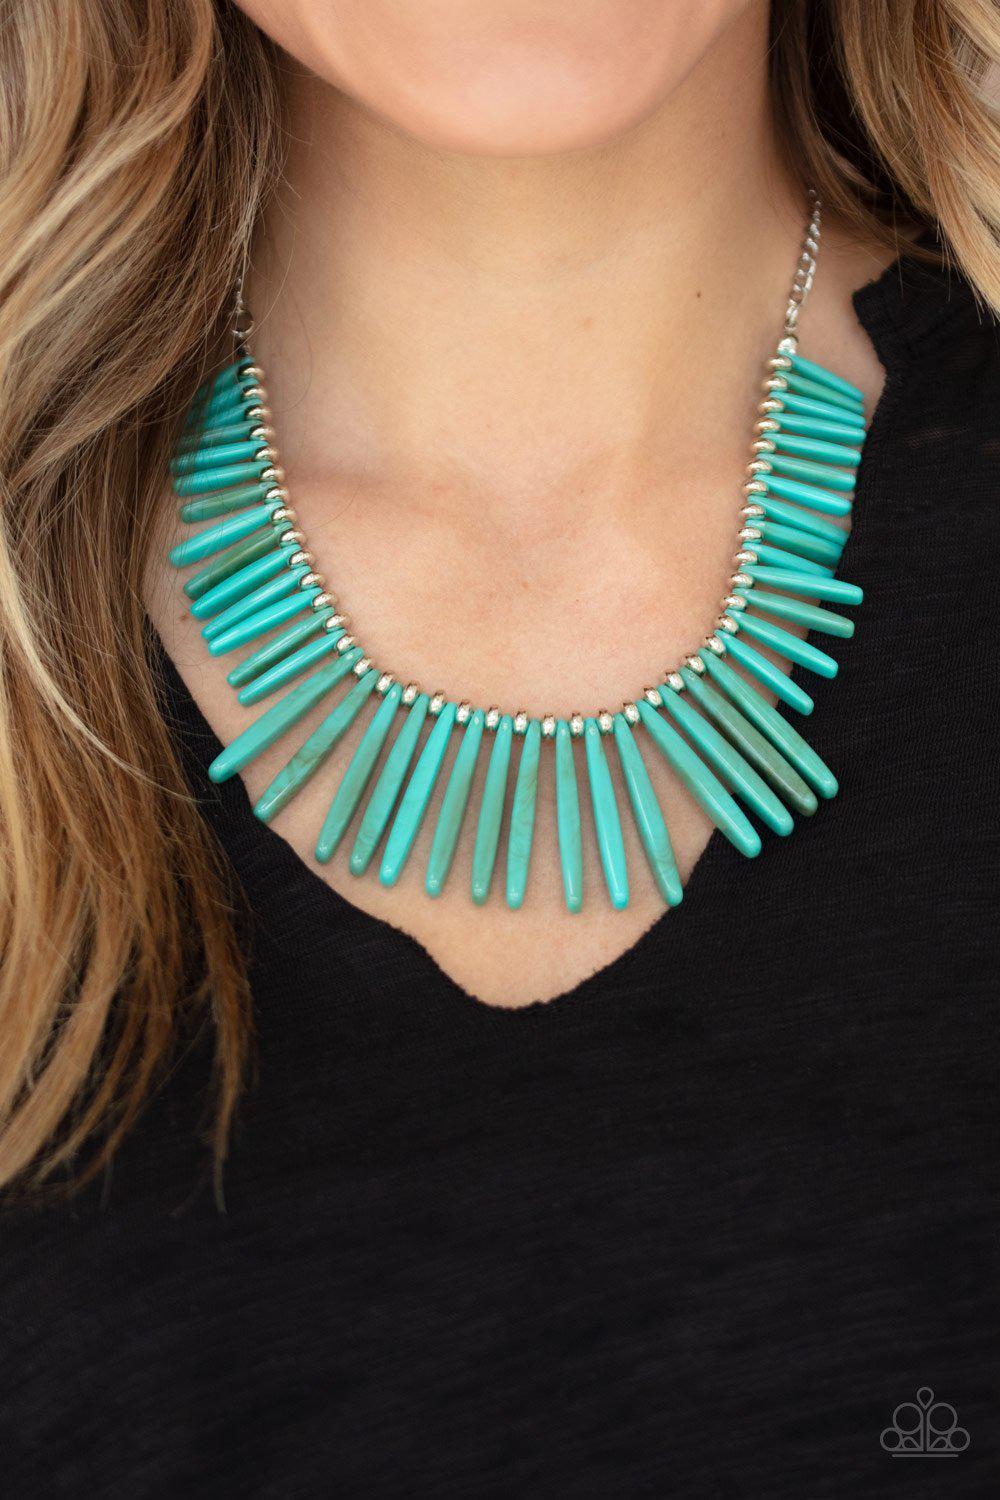 Out Of My Element Turquoise Blue Acrylic Necklace - Paparazzi Accessories LOTP Exclusive July 2020-CarasShop.com - $5 Jewelry by Cara Jewels